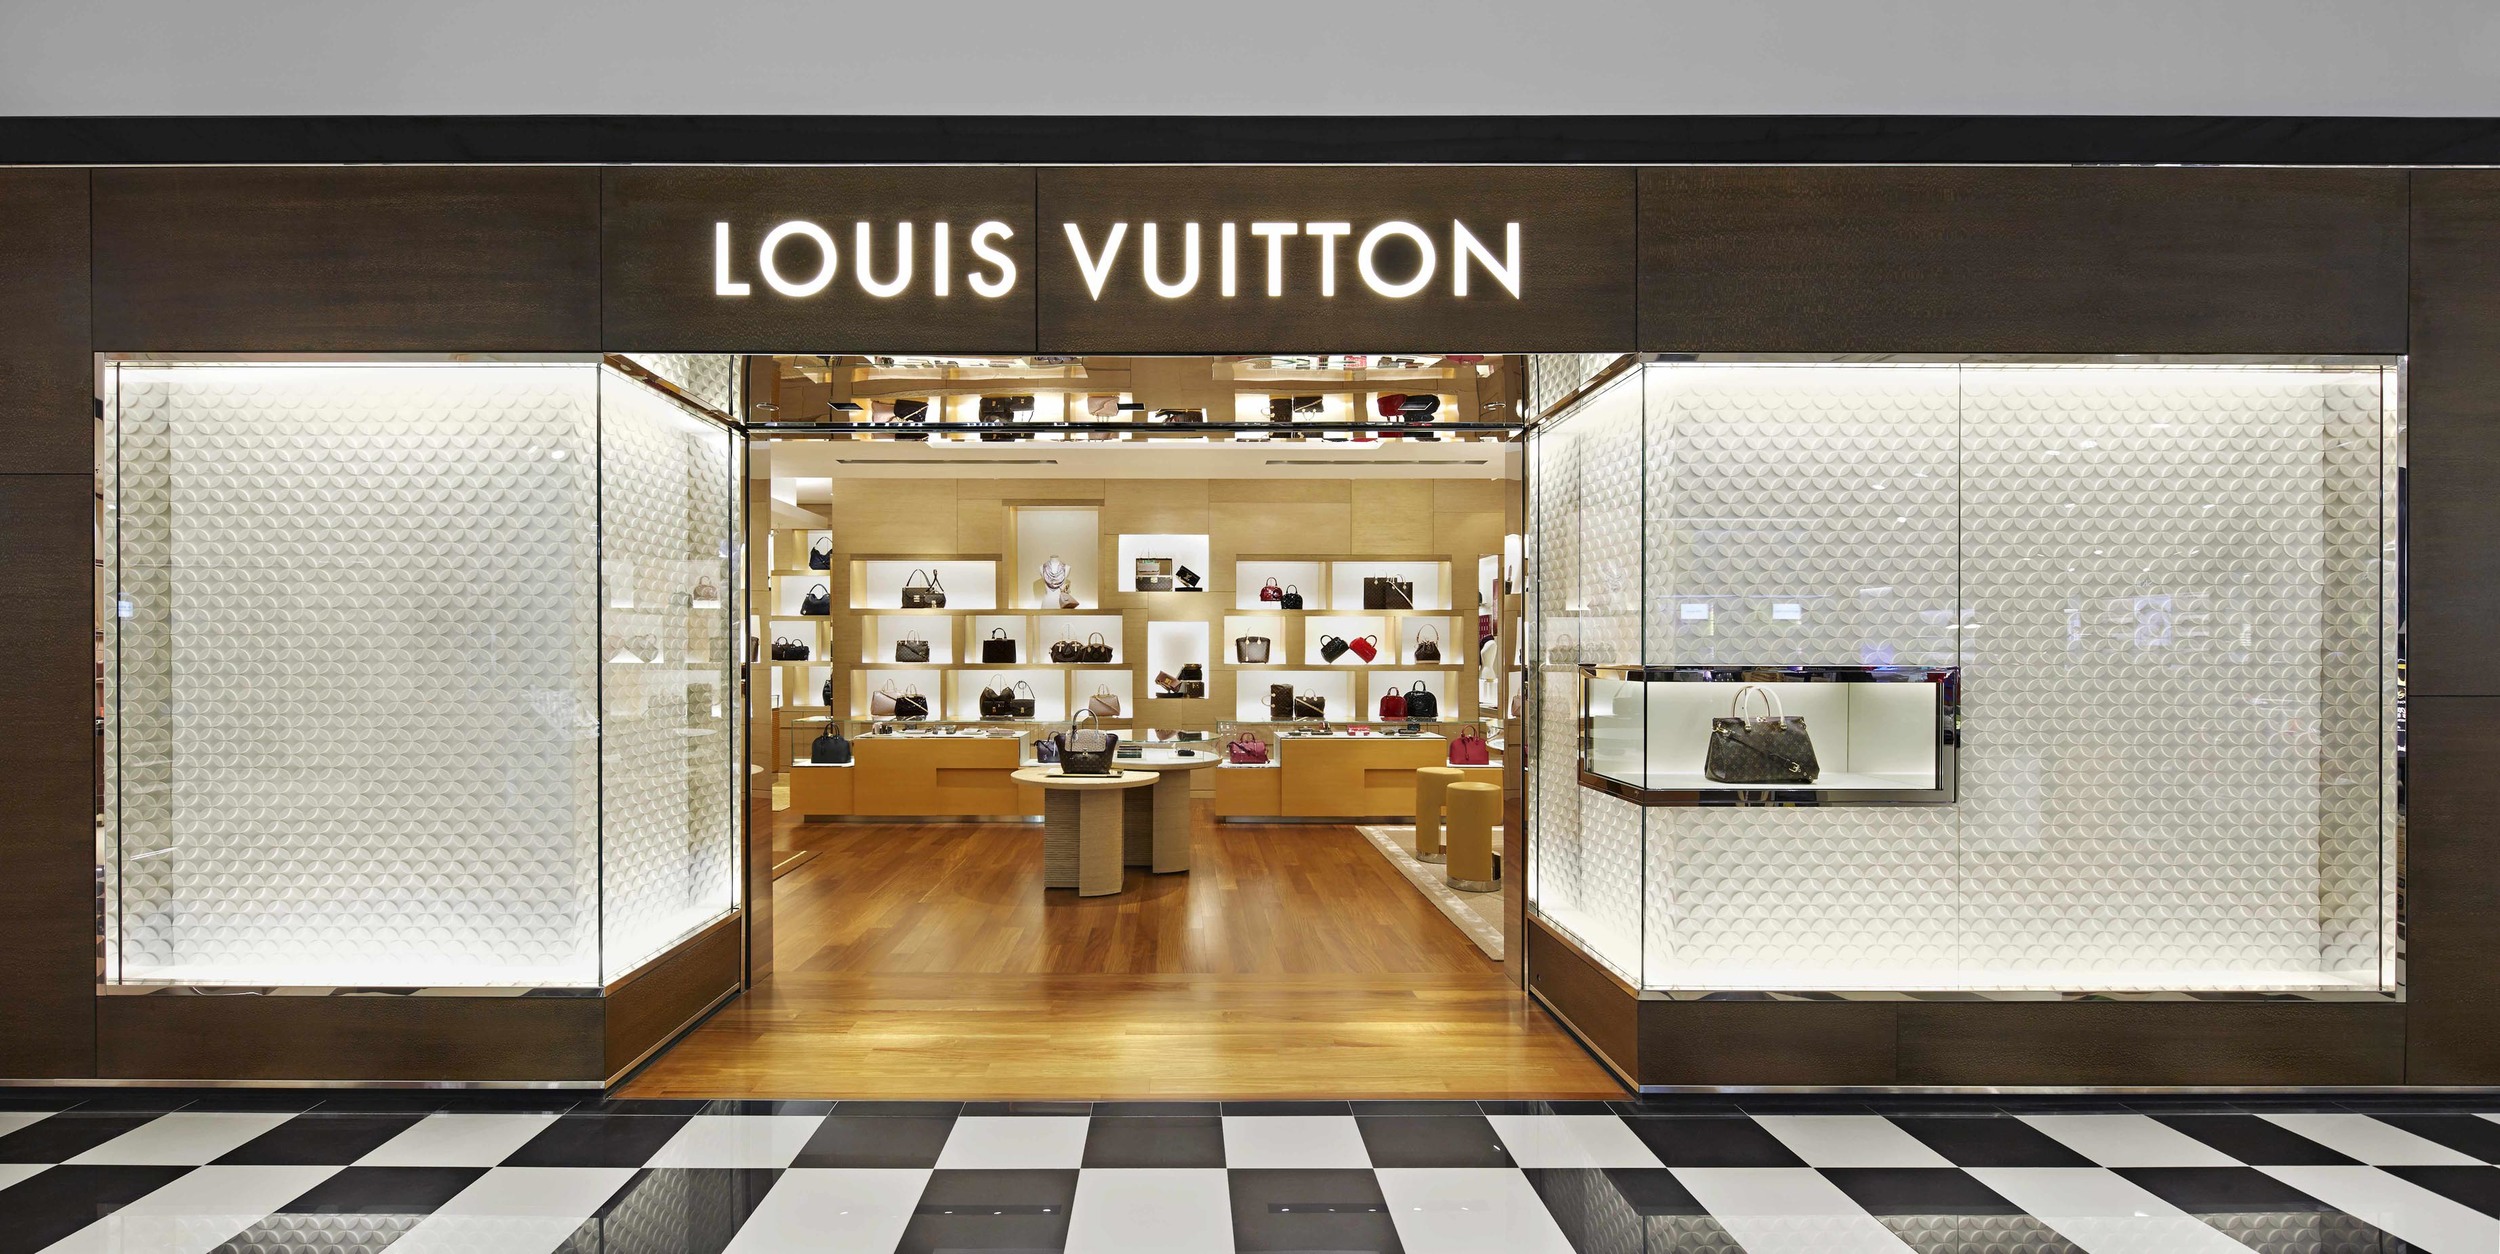 Louis Vuitton Glendale Bloomingdale's store, United States